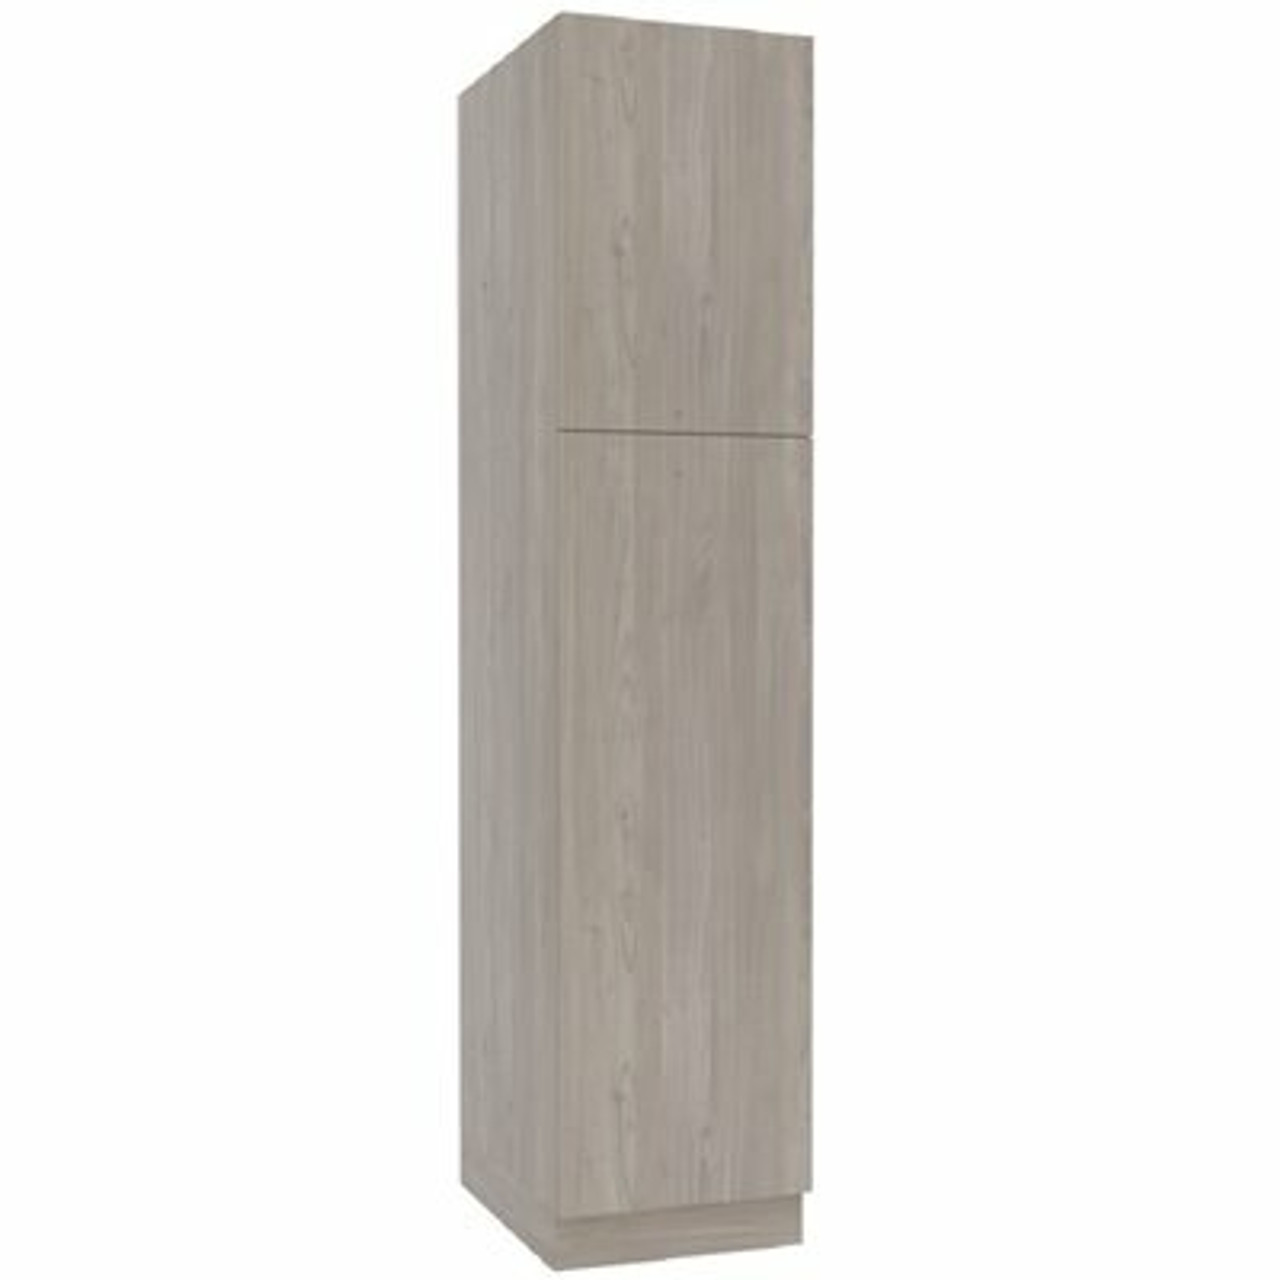 Cambridge Ready To Assemble Threespine 18 In. X 90 In. X 24 In. Stock Pantry Cabinet In Grey Nordic